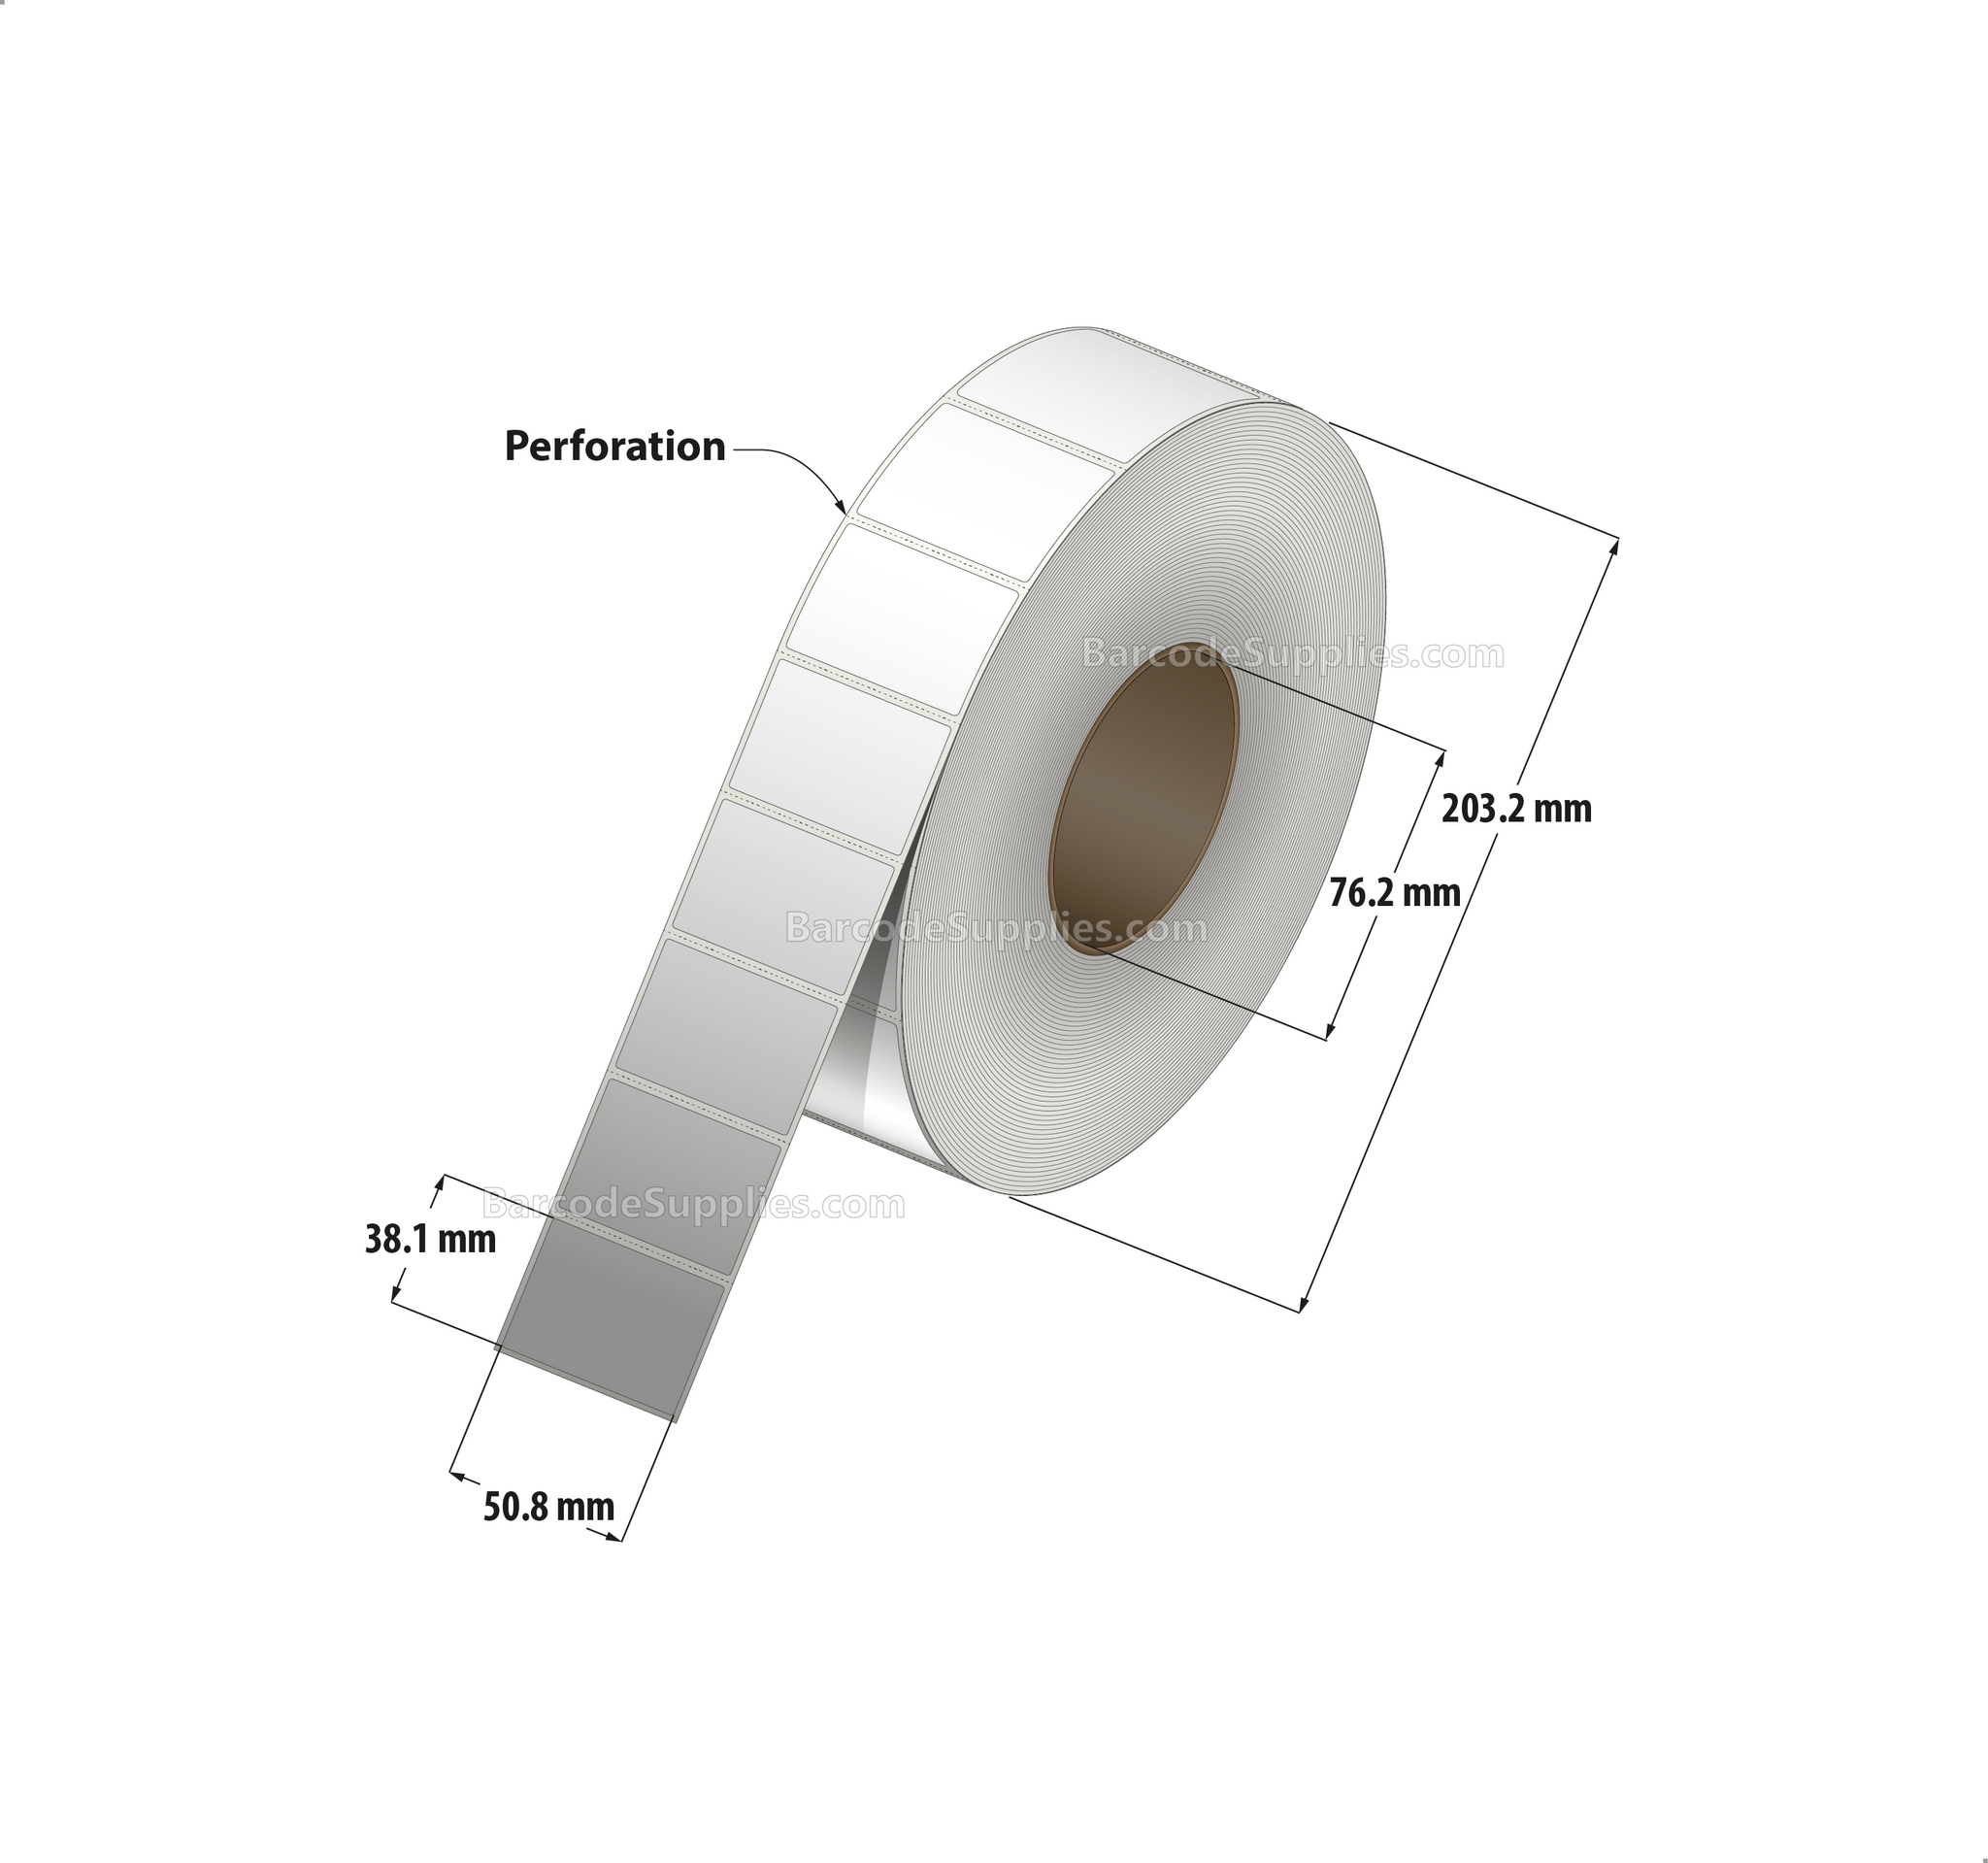 2 x 1.5 Thermal Transfer White Labels With Permanent Acrylic Adhesive - Perforated - 3800 Labels Per Roll - Carton Of 8 Rolls - 30400 Labels Total - MPN: TH215-1P